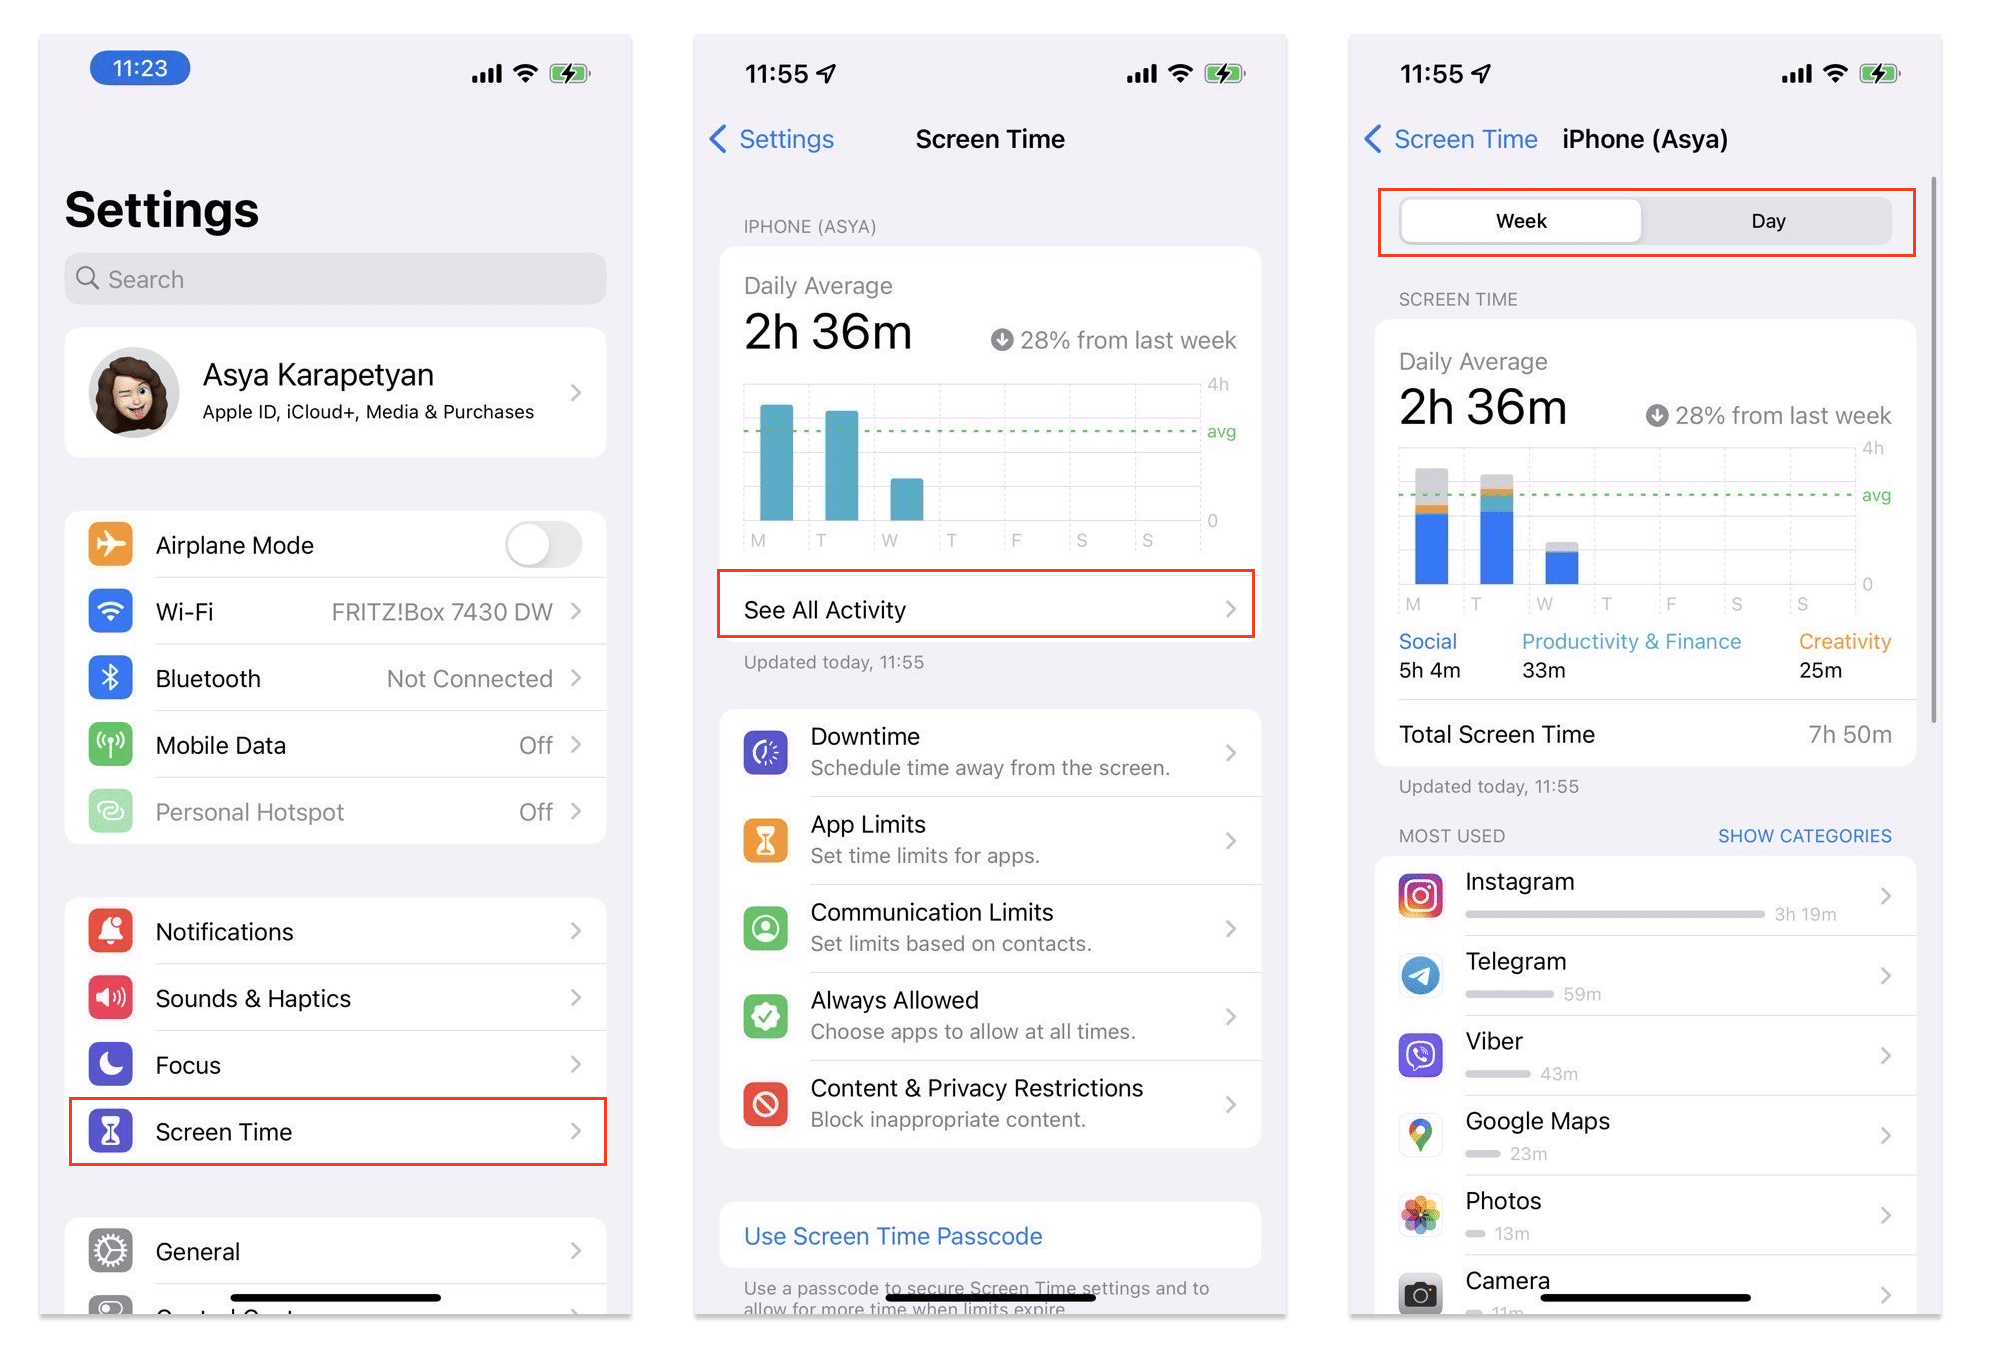 Viewing screen time statistics on iPhone